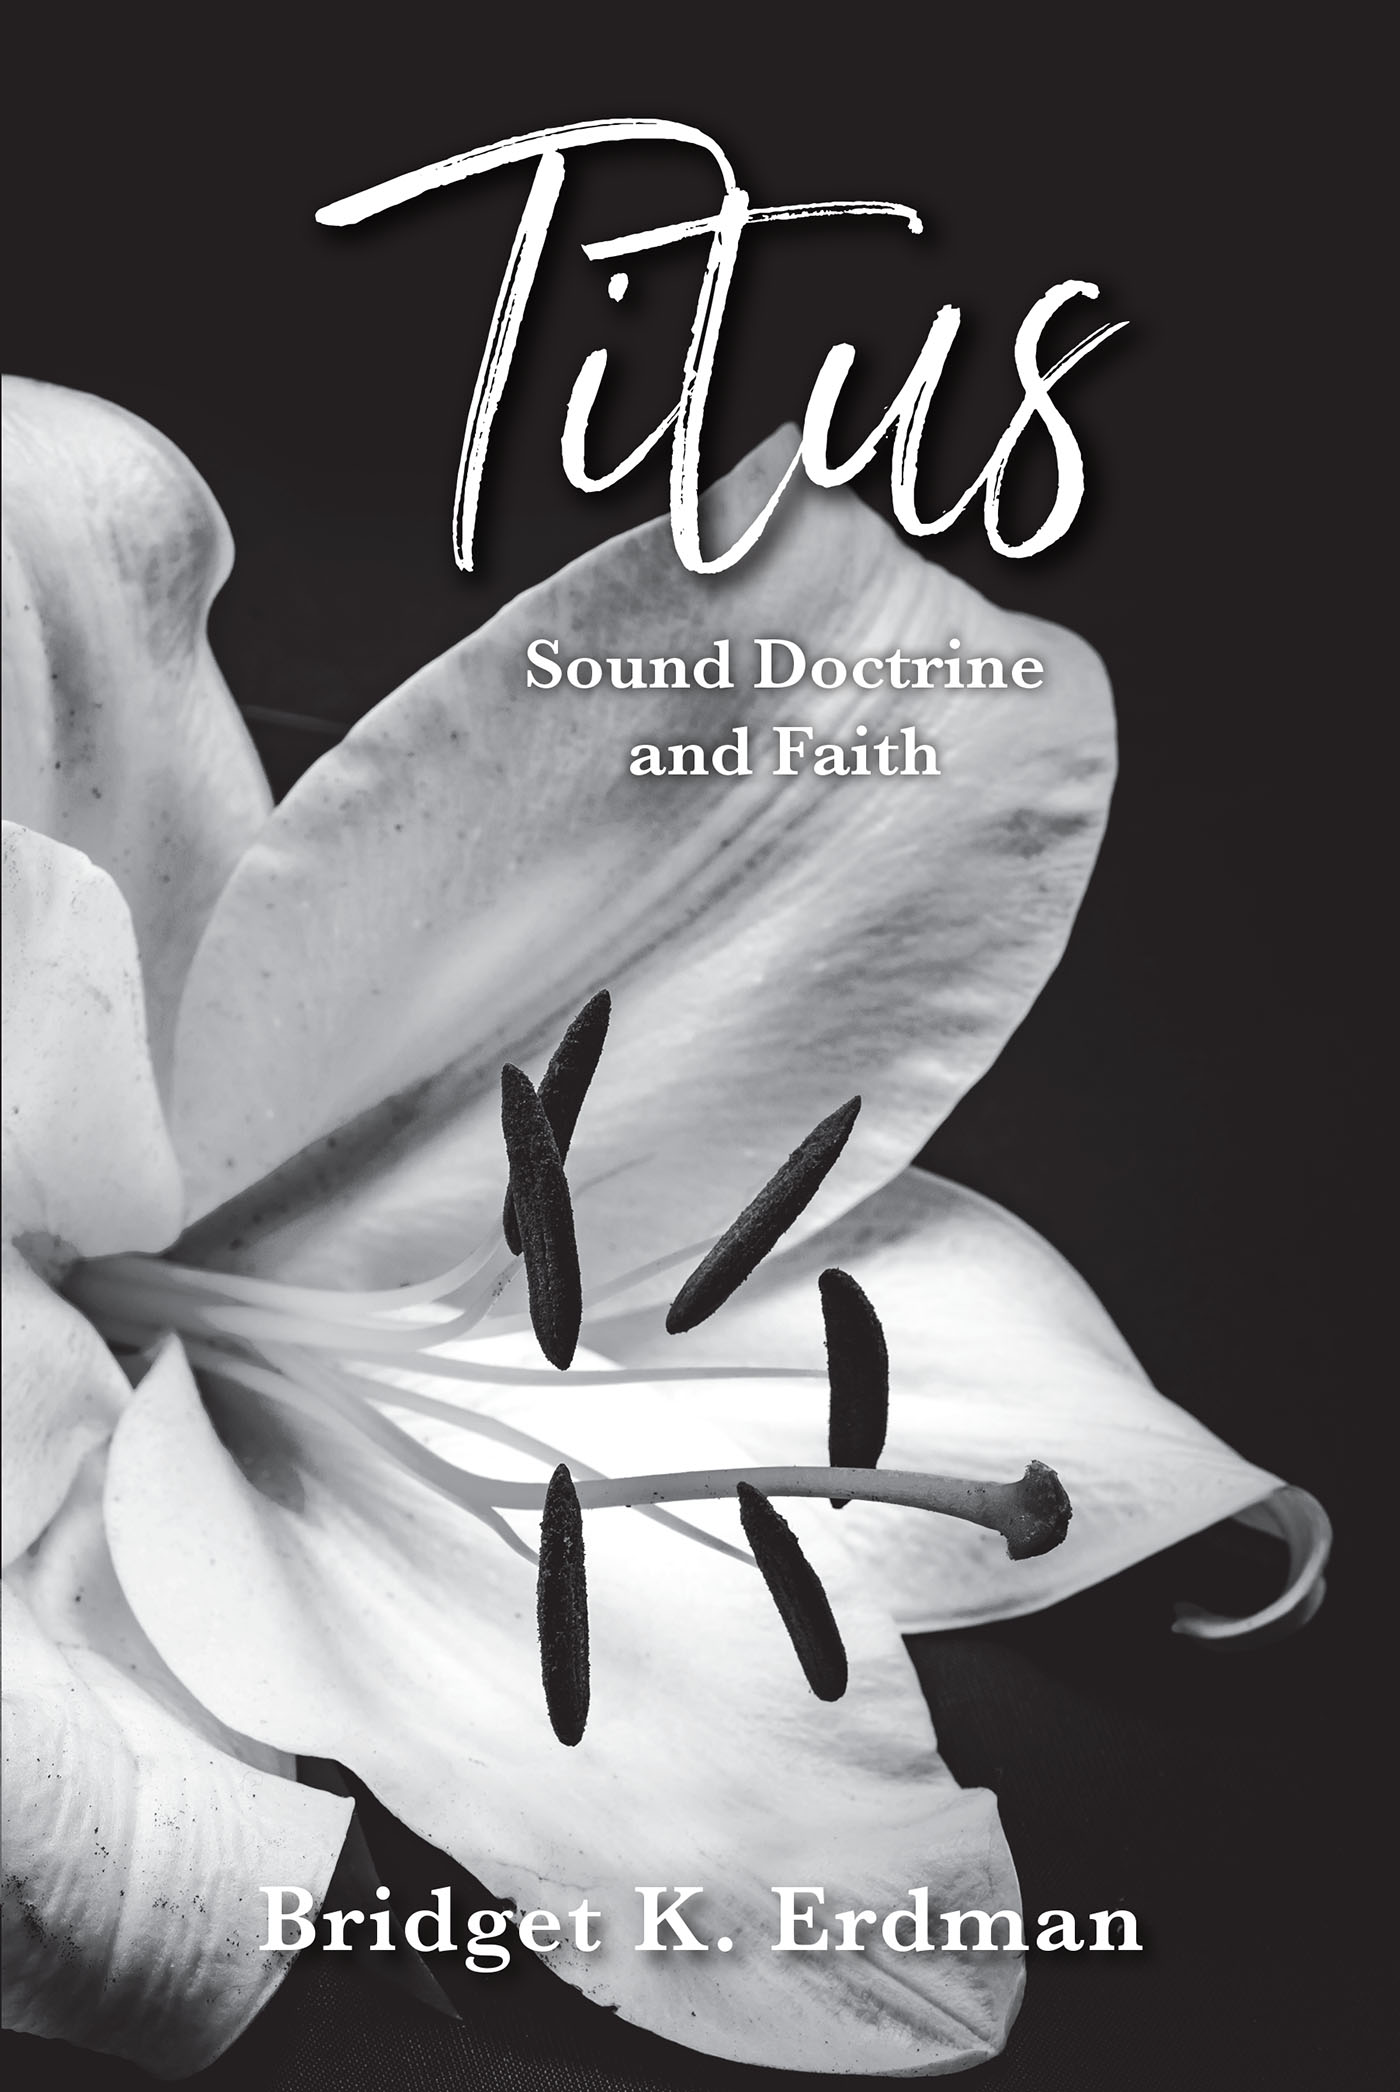 Author Bridget K. Erdman’s New Book, "Titus Sound Doctrine and Faith," is a Comprehensive Study Guide to Help Readers Explore the Book of Titus from the Bible